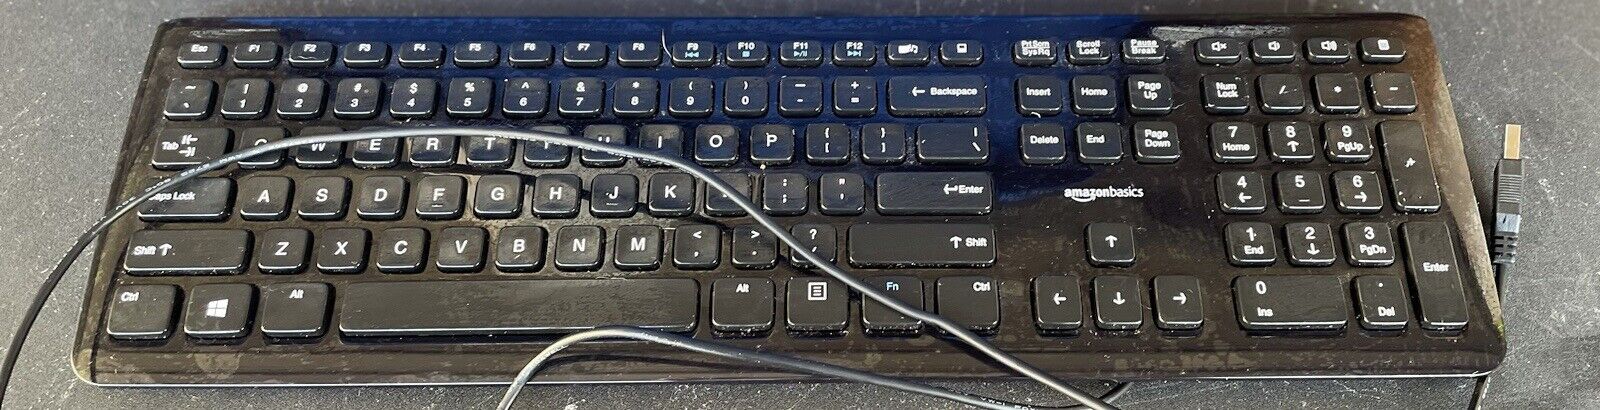 Amazon Basics  Wireless Keyboard  Have Cords No Mouse Lot Of 3